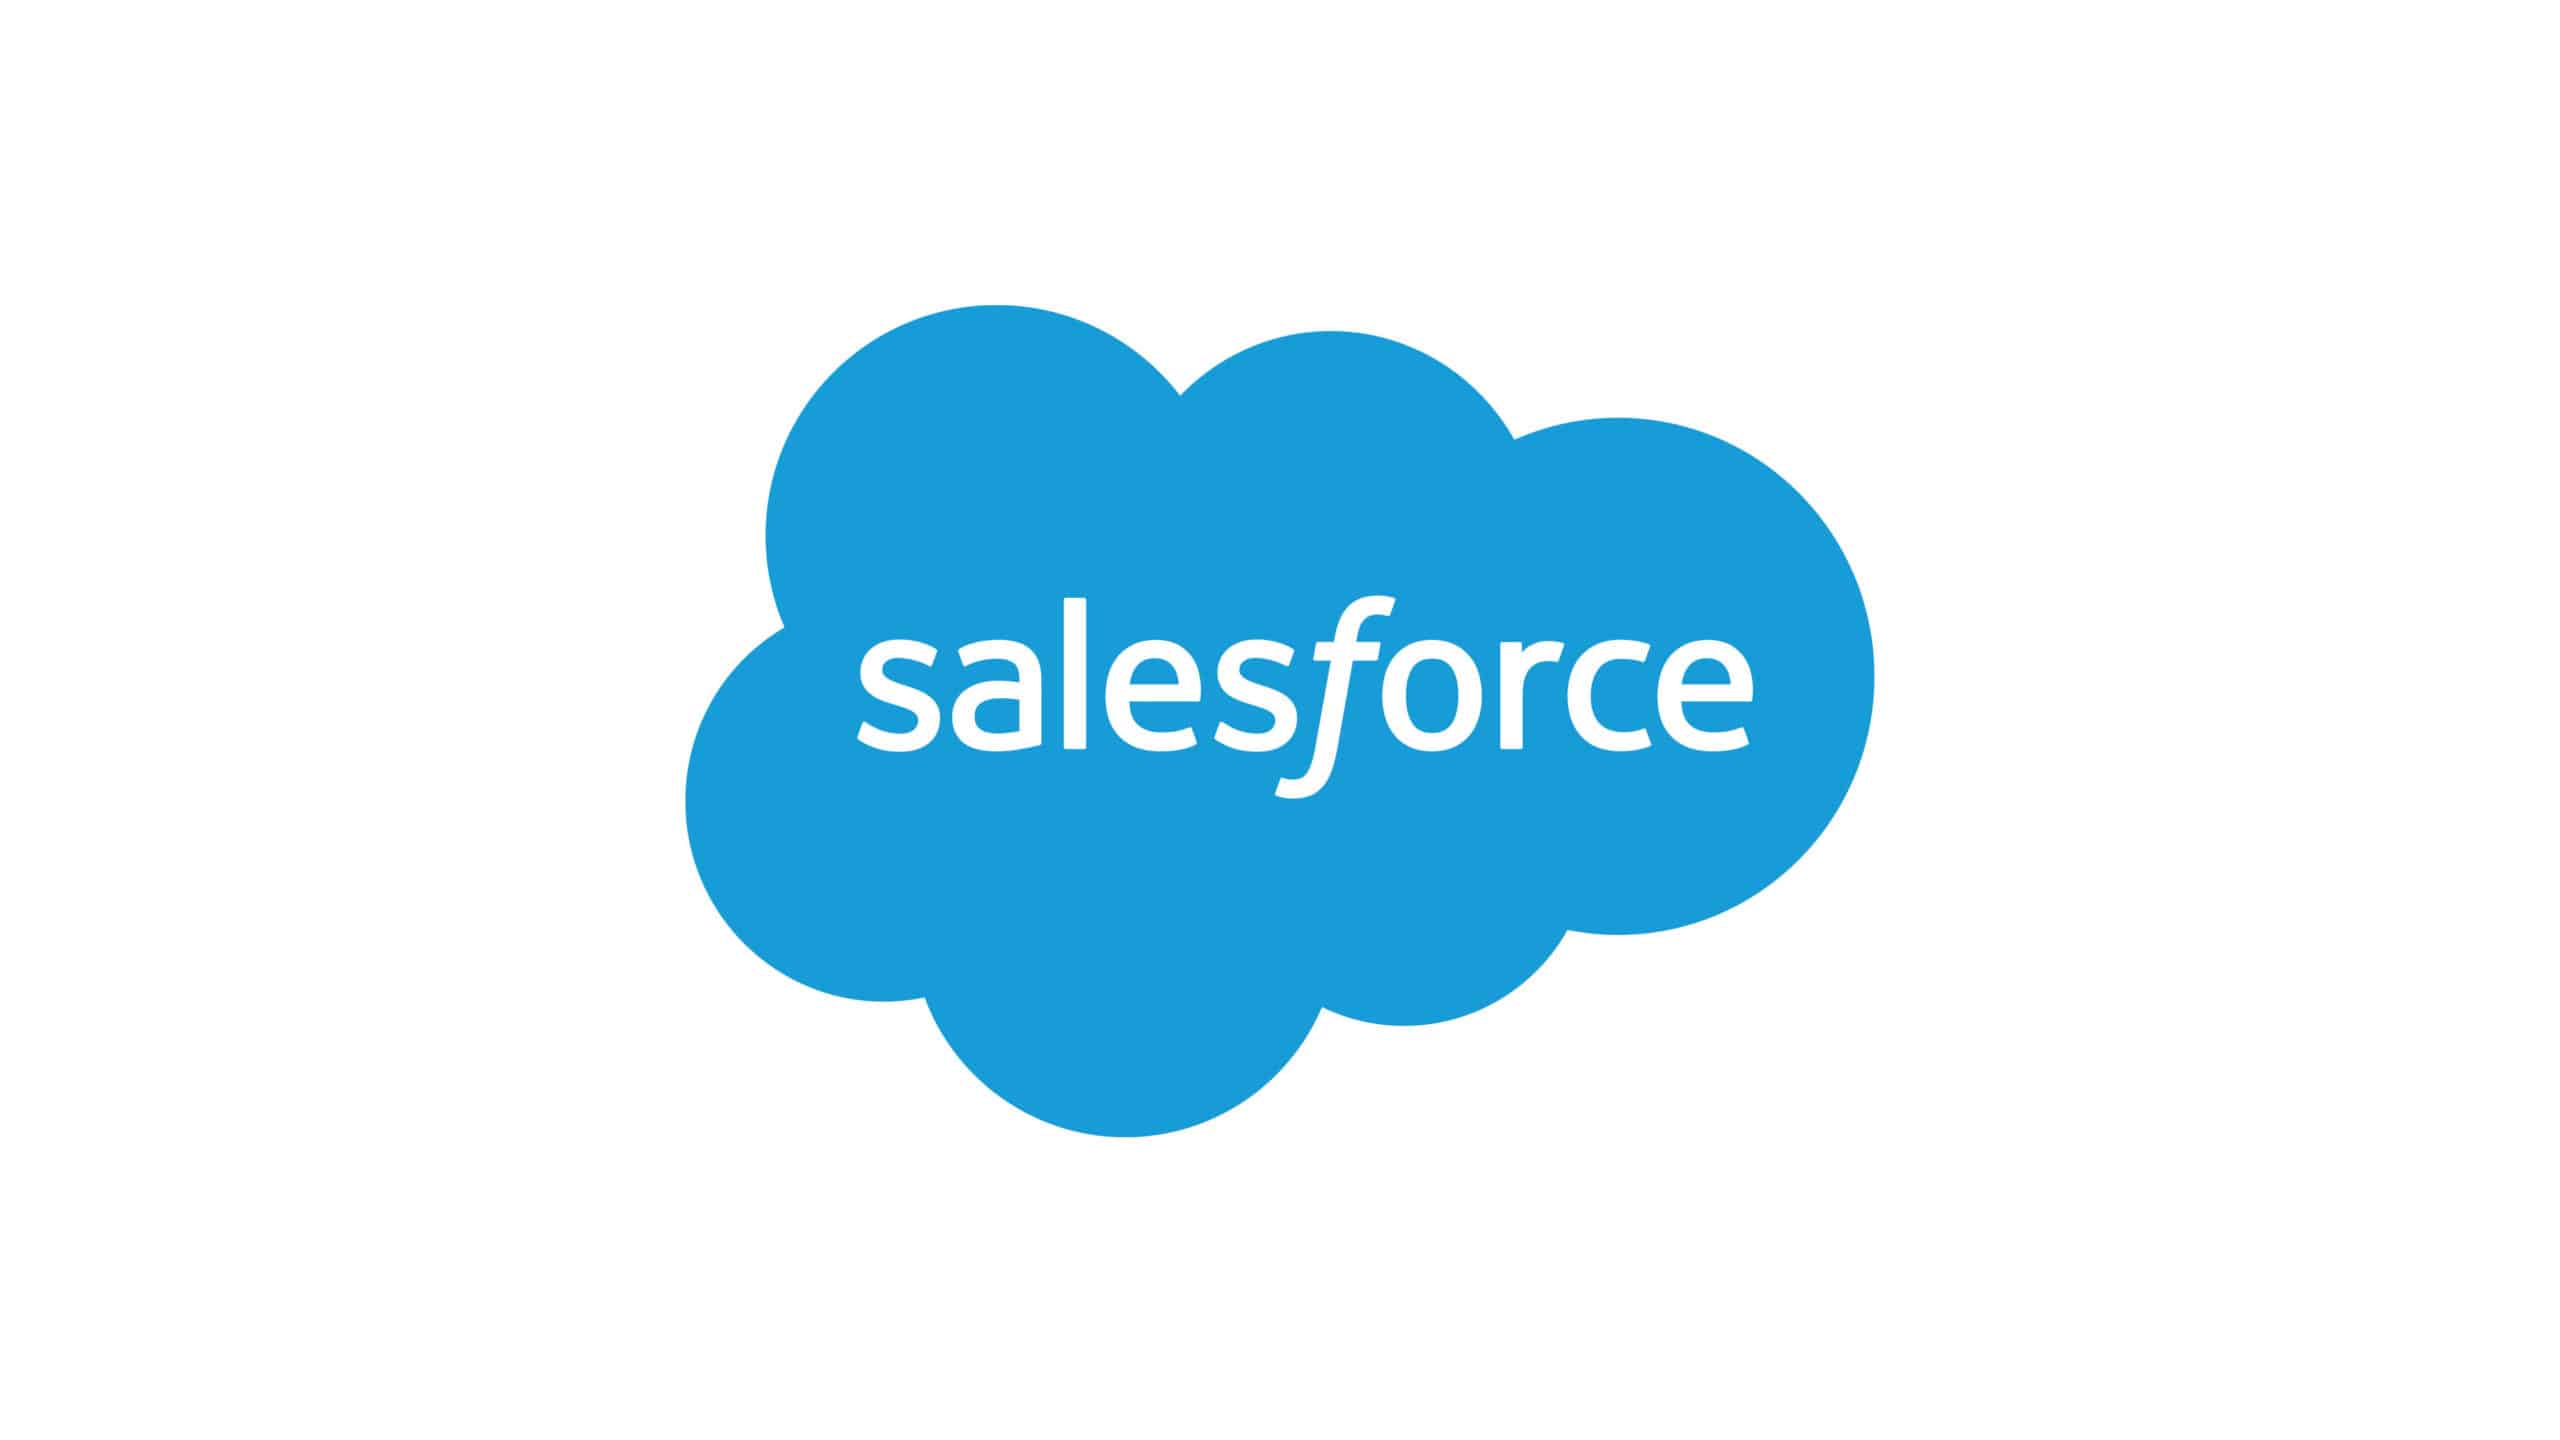 Salesforce Mailfold Integration makes sending direct mail from Mailfold to your customers easy.